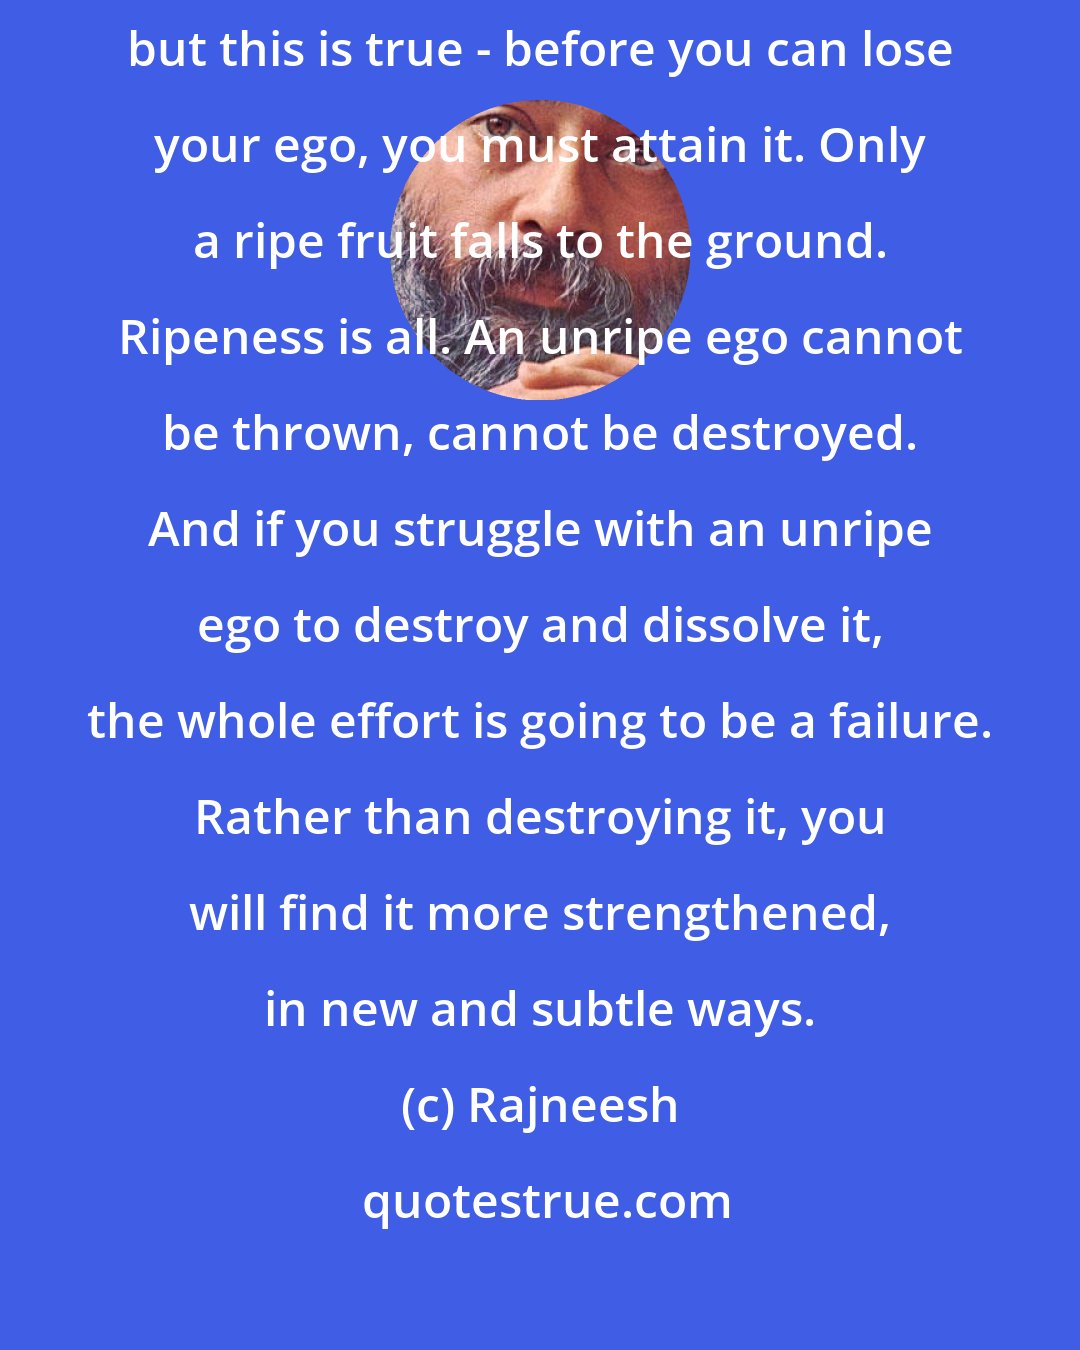 Rajneesh: It is one of the greatest problems. It will appear very paradoxical, but this is true - before you can lose your ego, you must attain it. Only a ripe fruit falls to the ground. Ripeness is all. An unripe ego cannot be thrown, cannot be destroyed. And if you struggle with an unripe ego to destroy and dissolve it, the whole effort is going to be a failure. Rather than destroying it, you will find it more strengthened, in new and subtle ways.